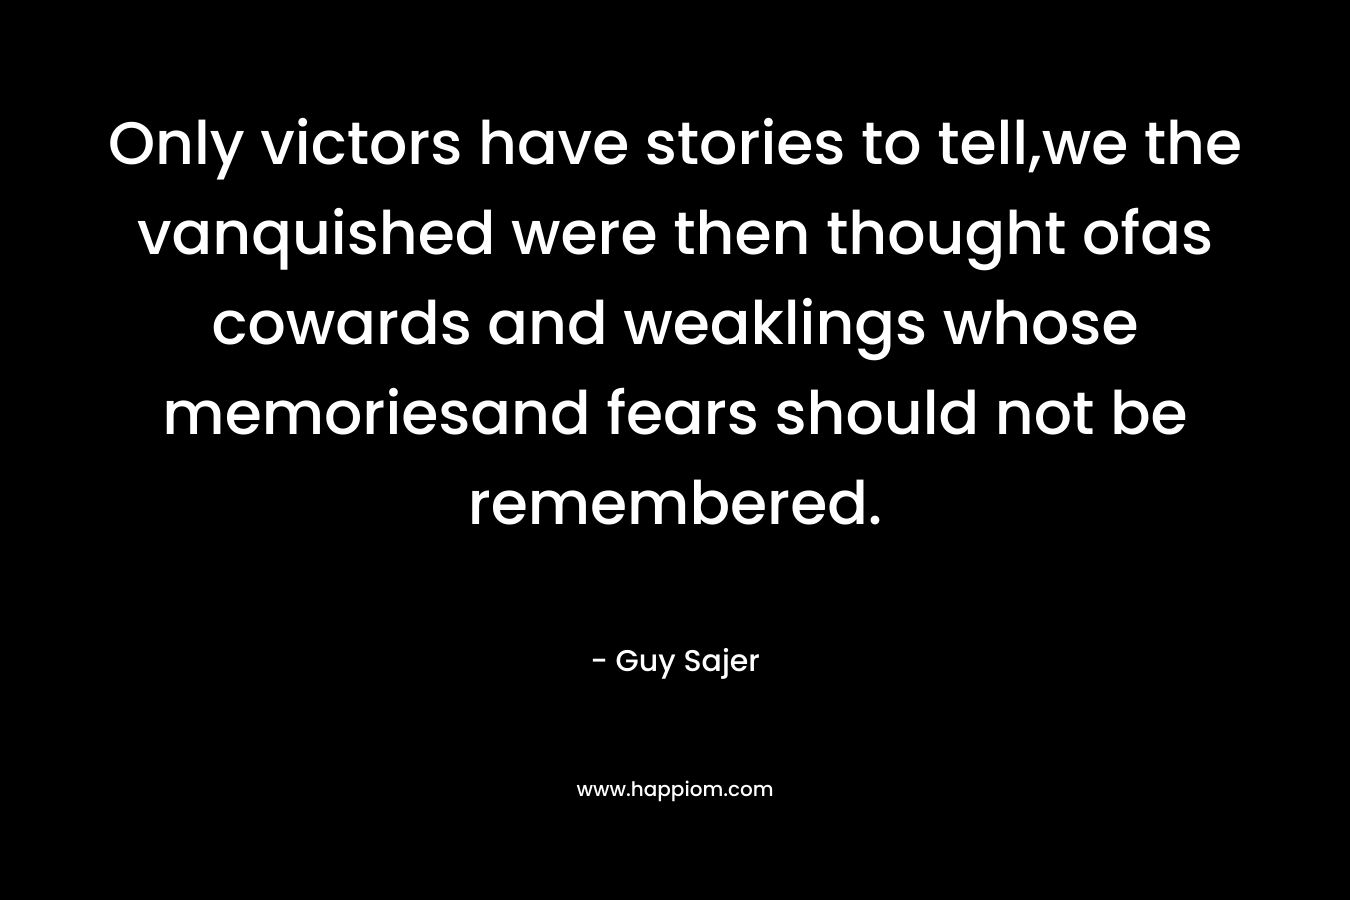 Only victors have stories to tell,we the vanquished were then thought ofas cowards and weaklings whose memoriesand fears should not be remembered. – Guy Sajer